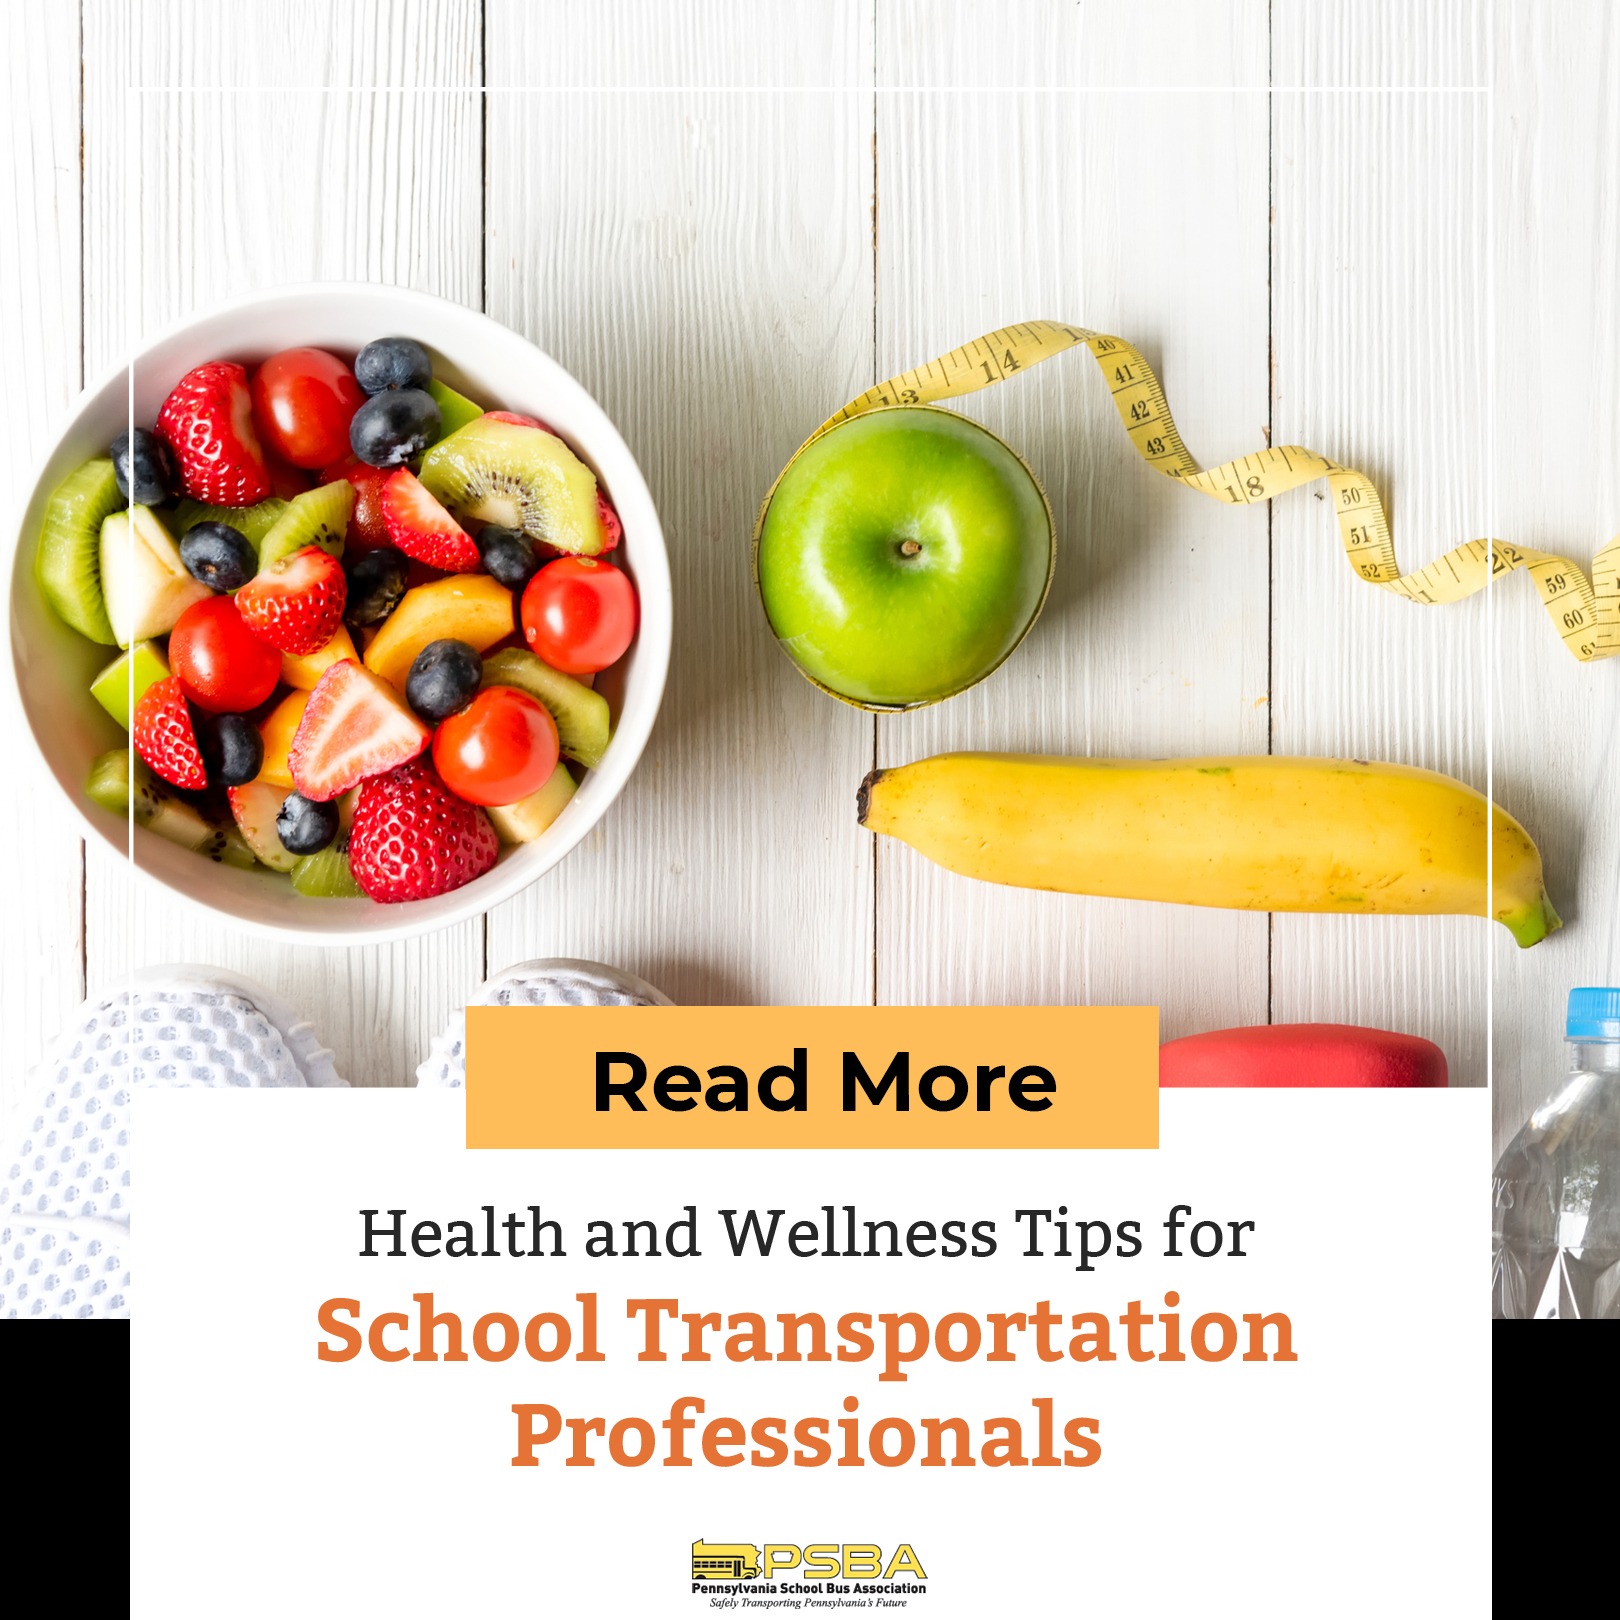 Health and Wellness Tips for School Transportation Professionals